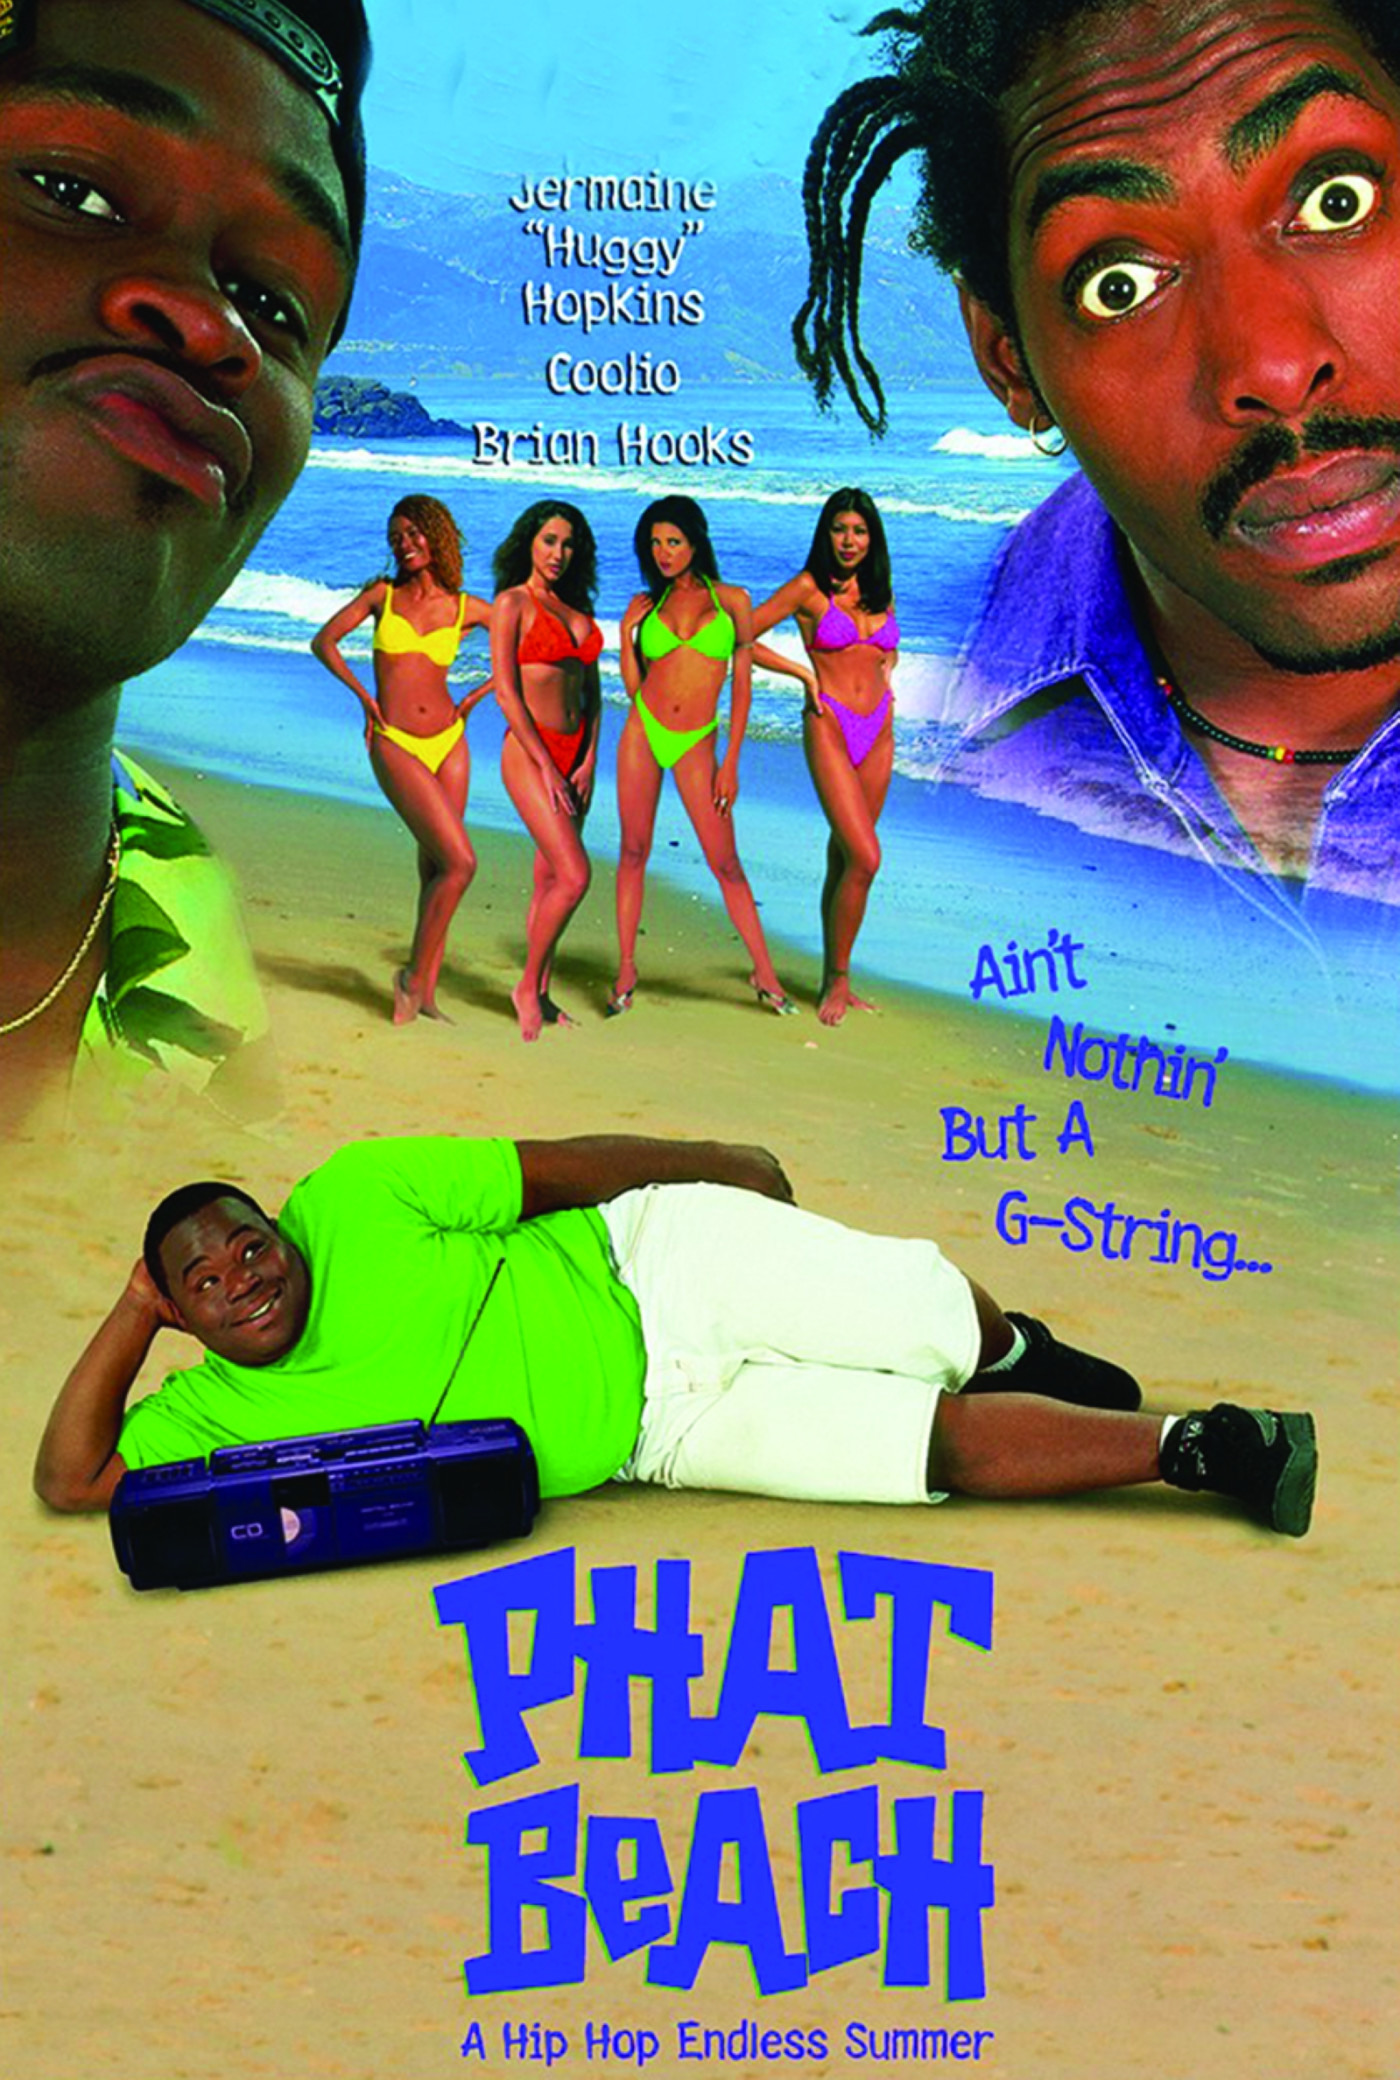 Picked Up On The Beach And Fucked Hard - The Oral History of Phat Beach | Complex